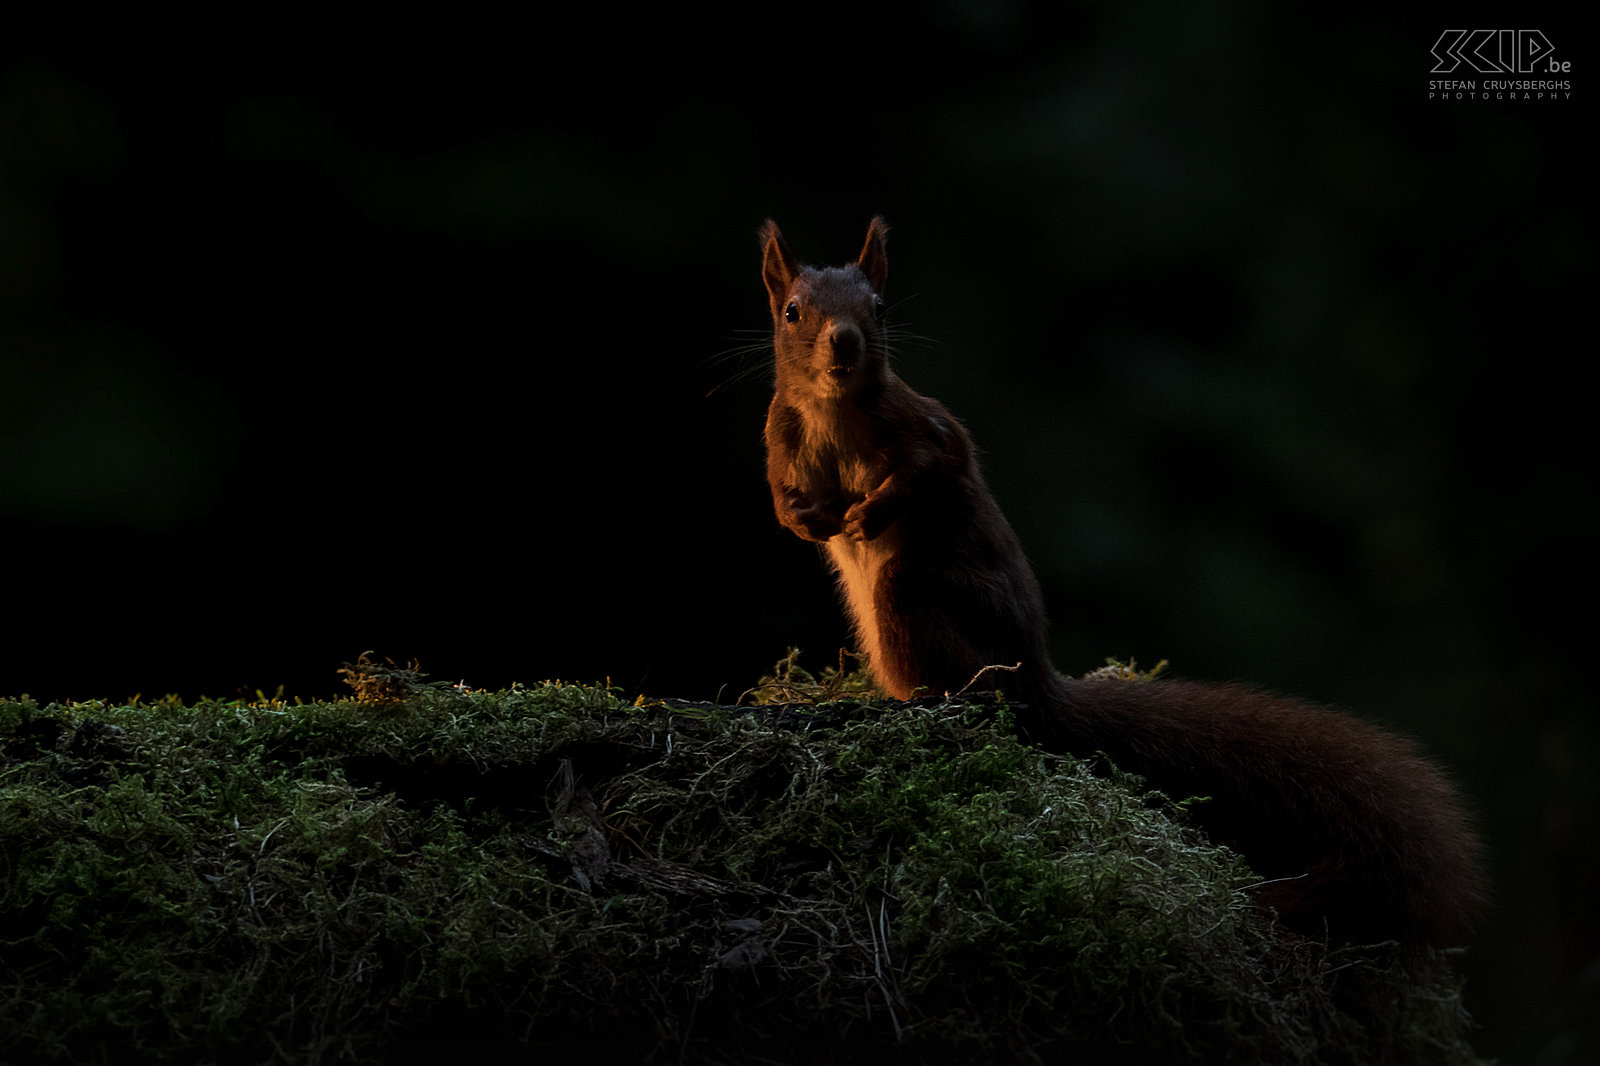 Squirrel at dawn A squirrel on an early dark autumn morning with some artificial light Stefan Cruysberghs